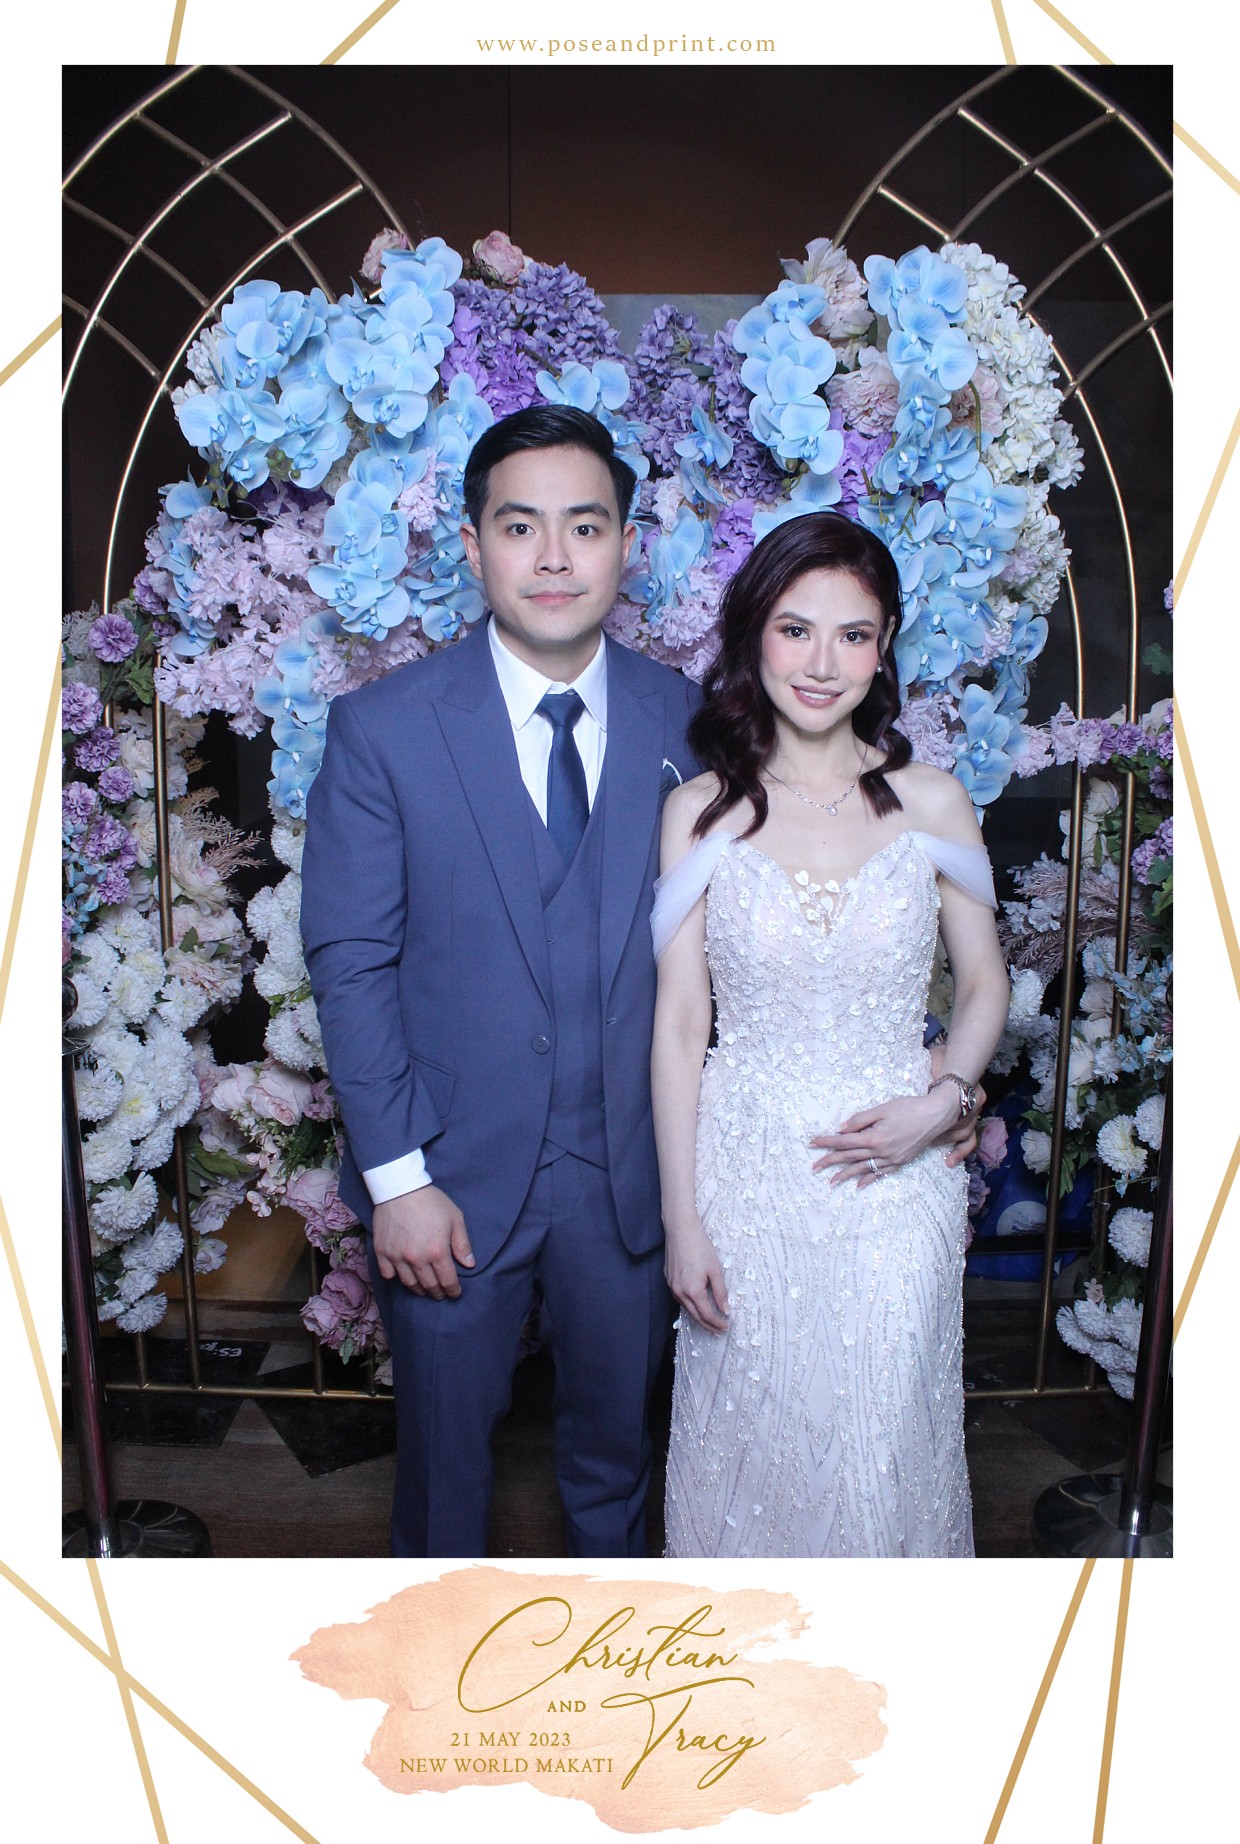 Christian and Tracy’s Wedding – Mirror Booth